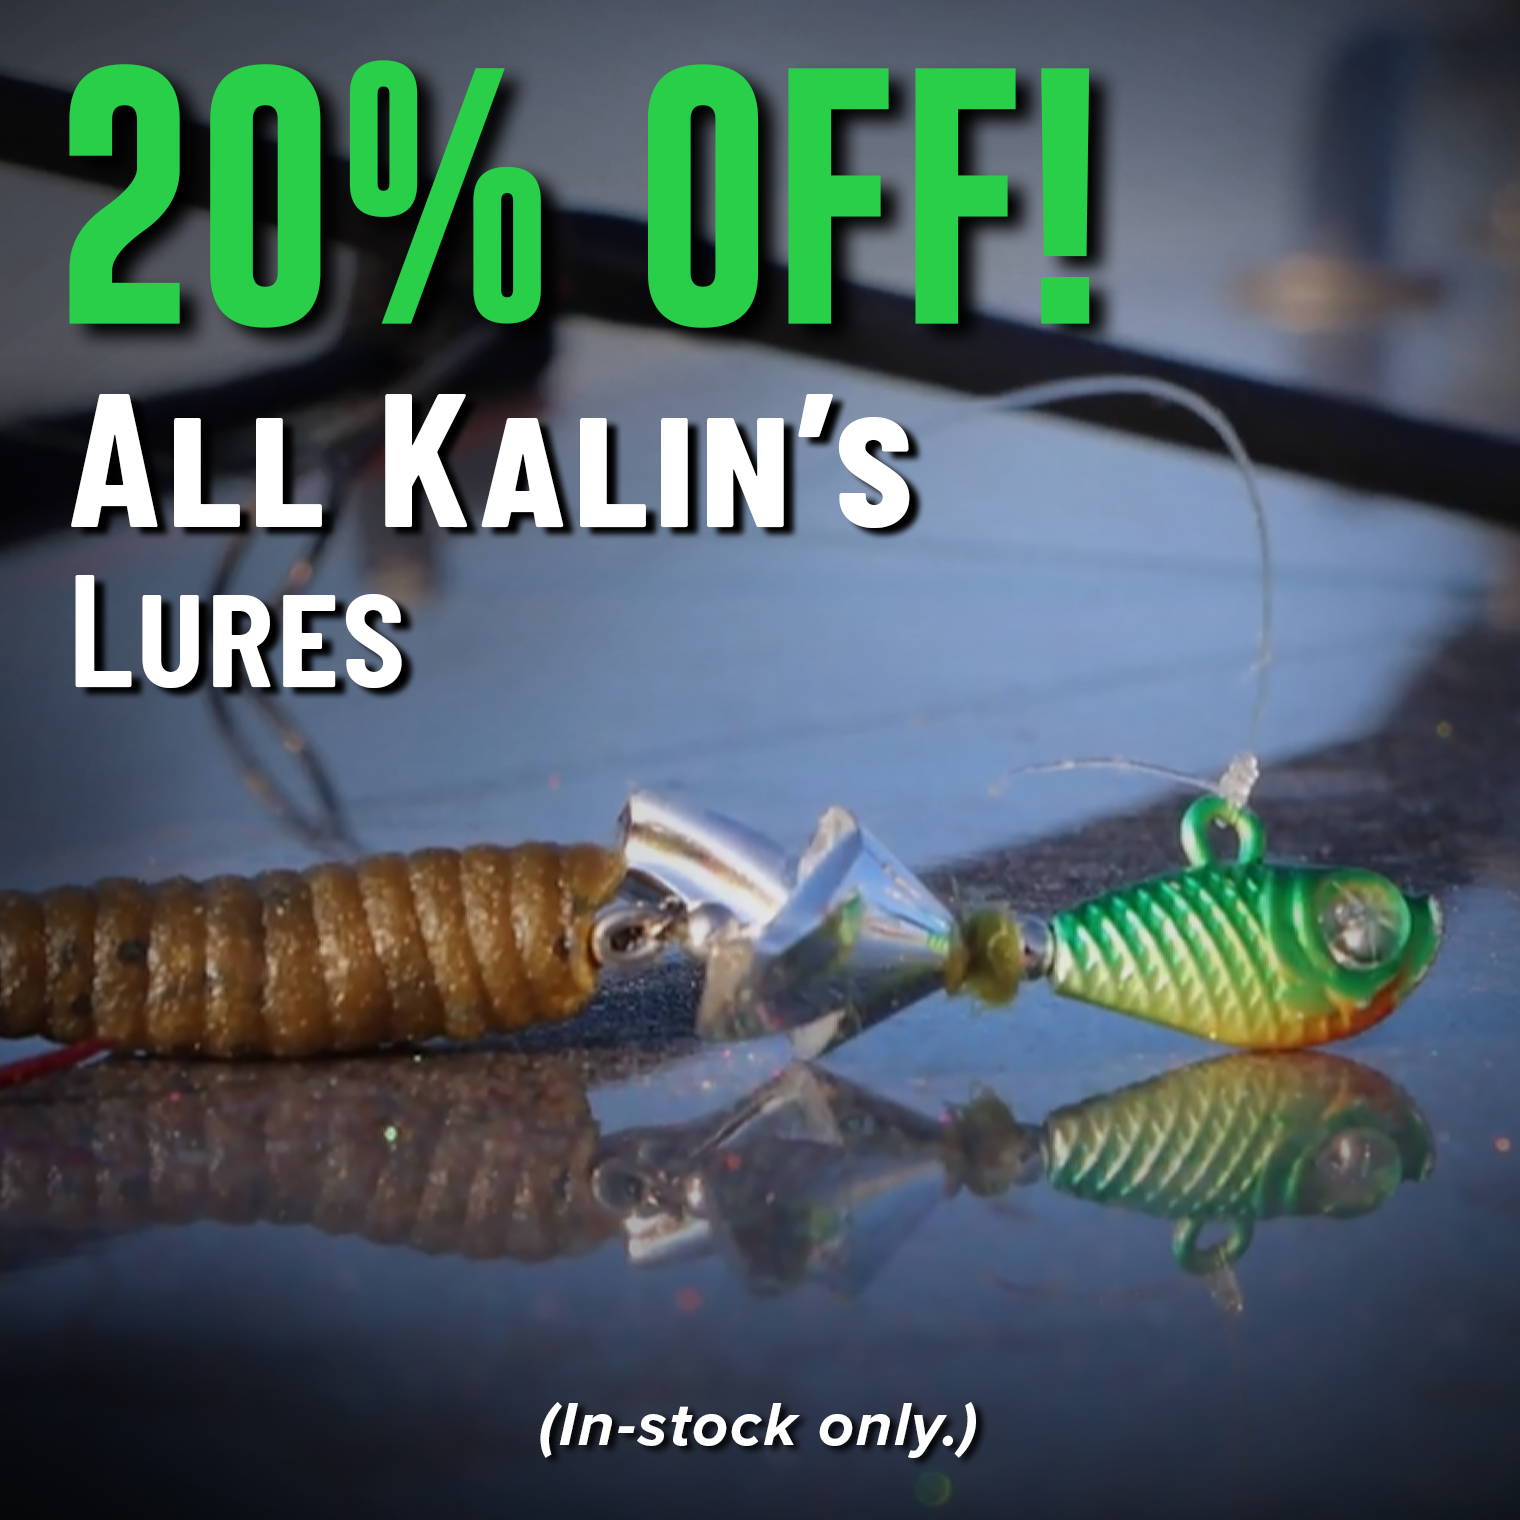 20% Off! All Kalin's Lures (In-stock only.)